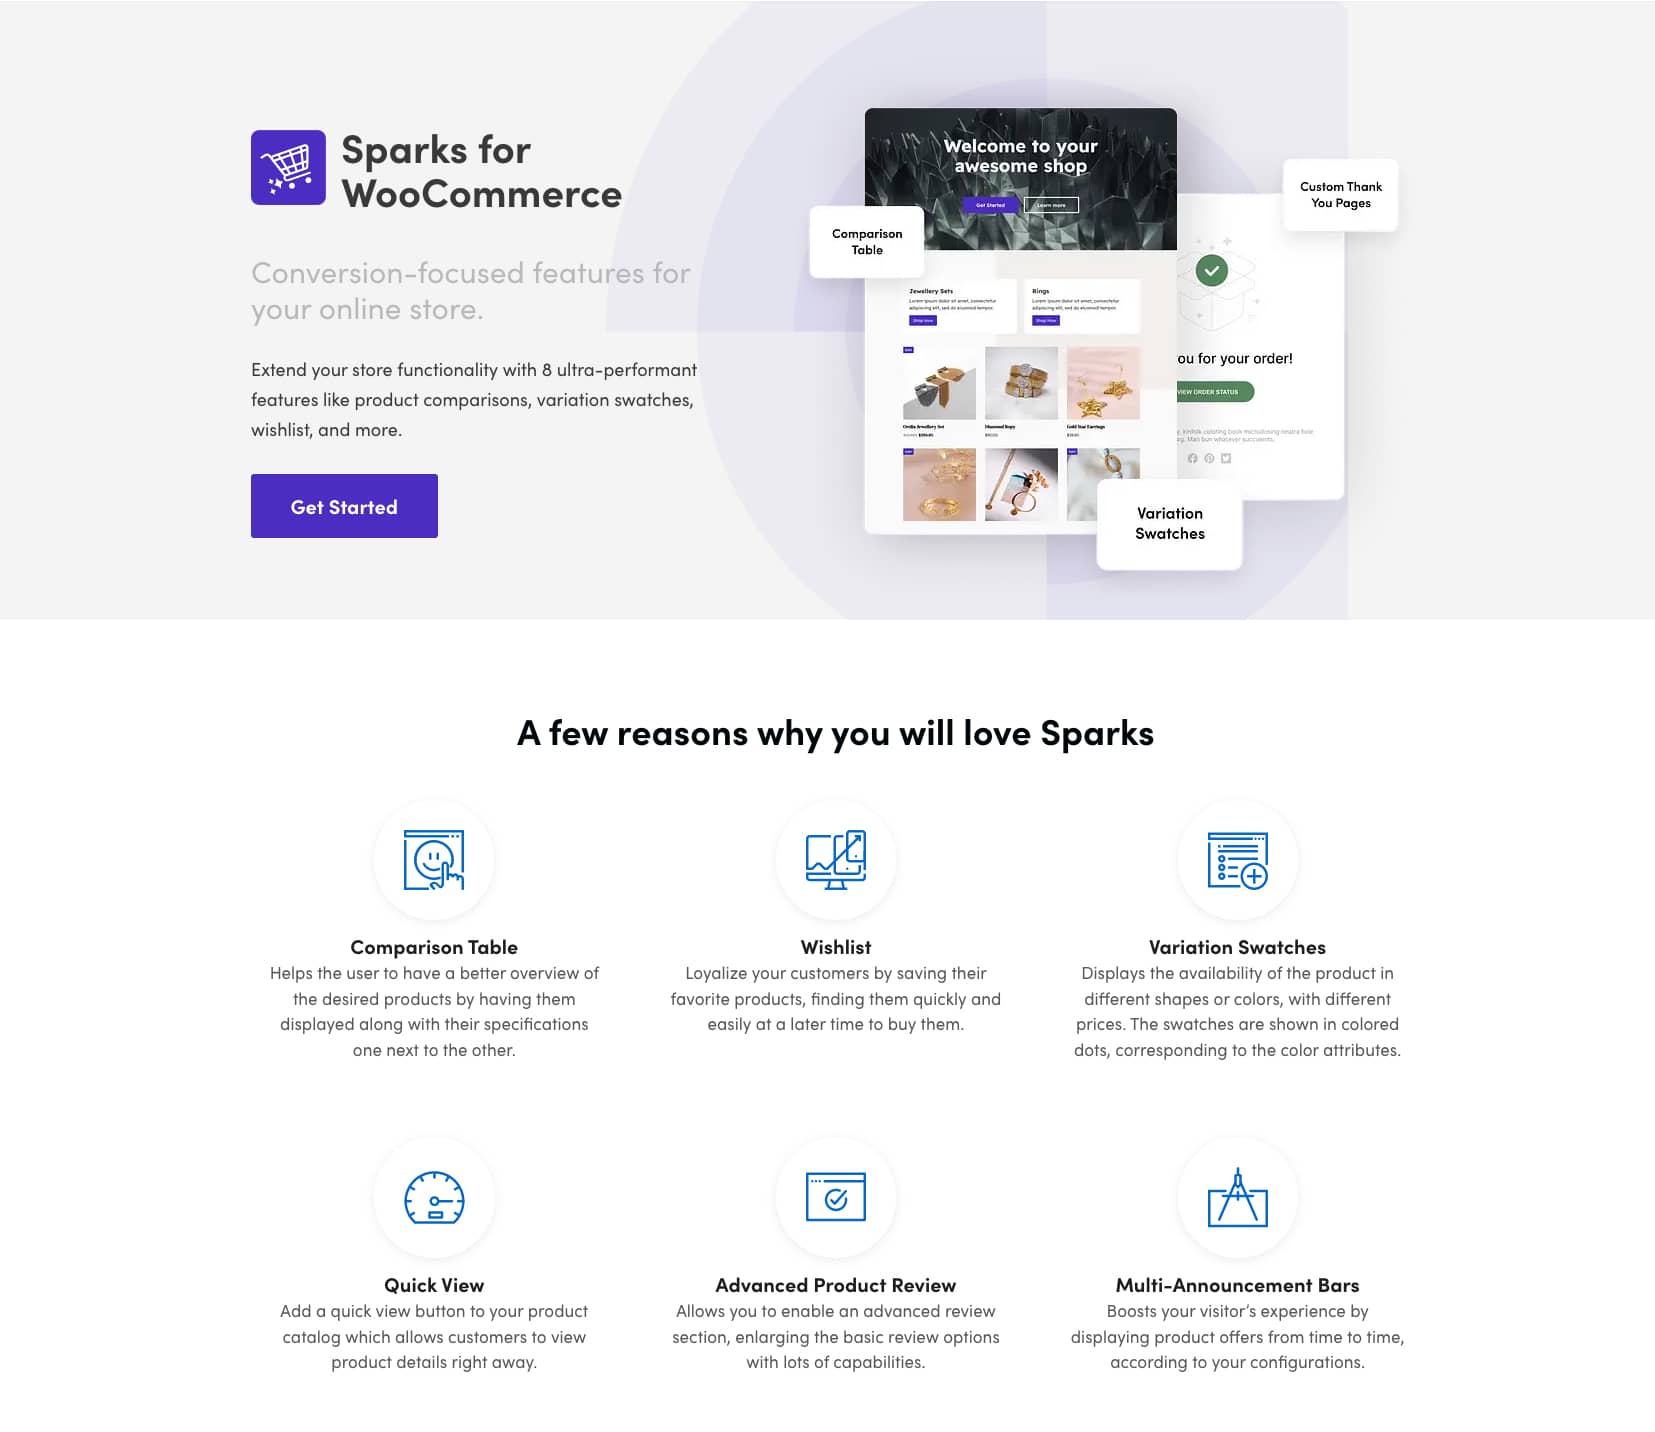 Sparks for WooCommerce is one of the best ecommerce plugins for WordPress.